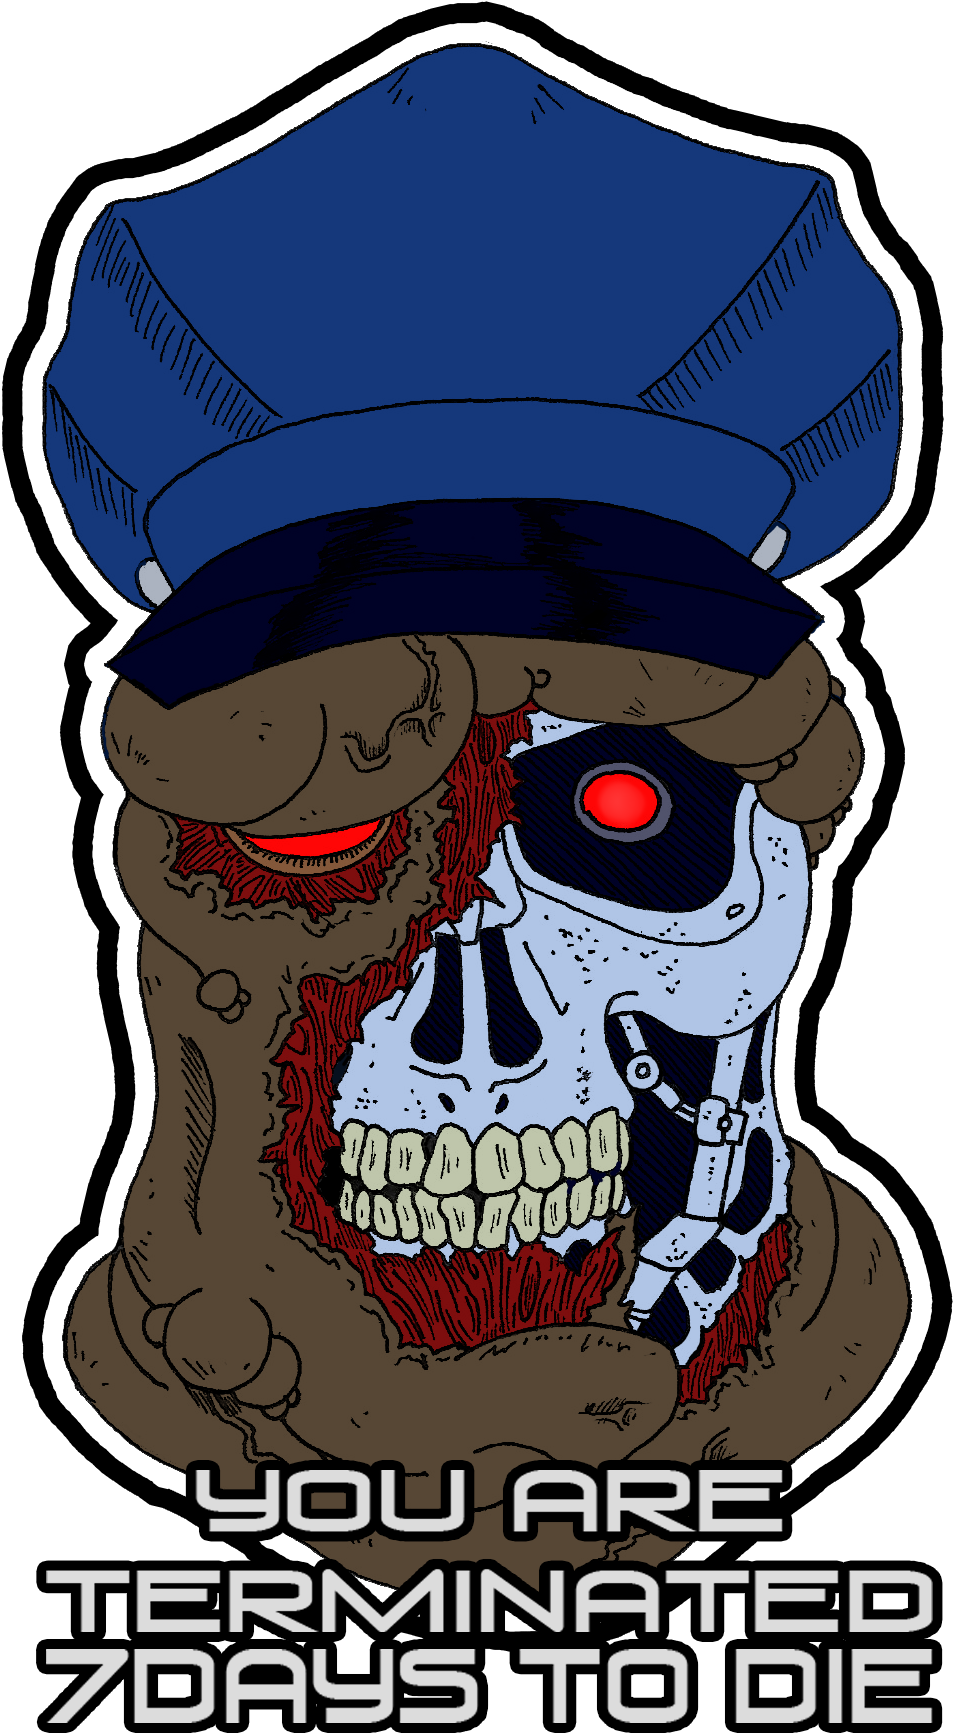 A Cartoon Of A Skull With A Blue Hat